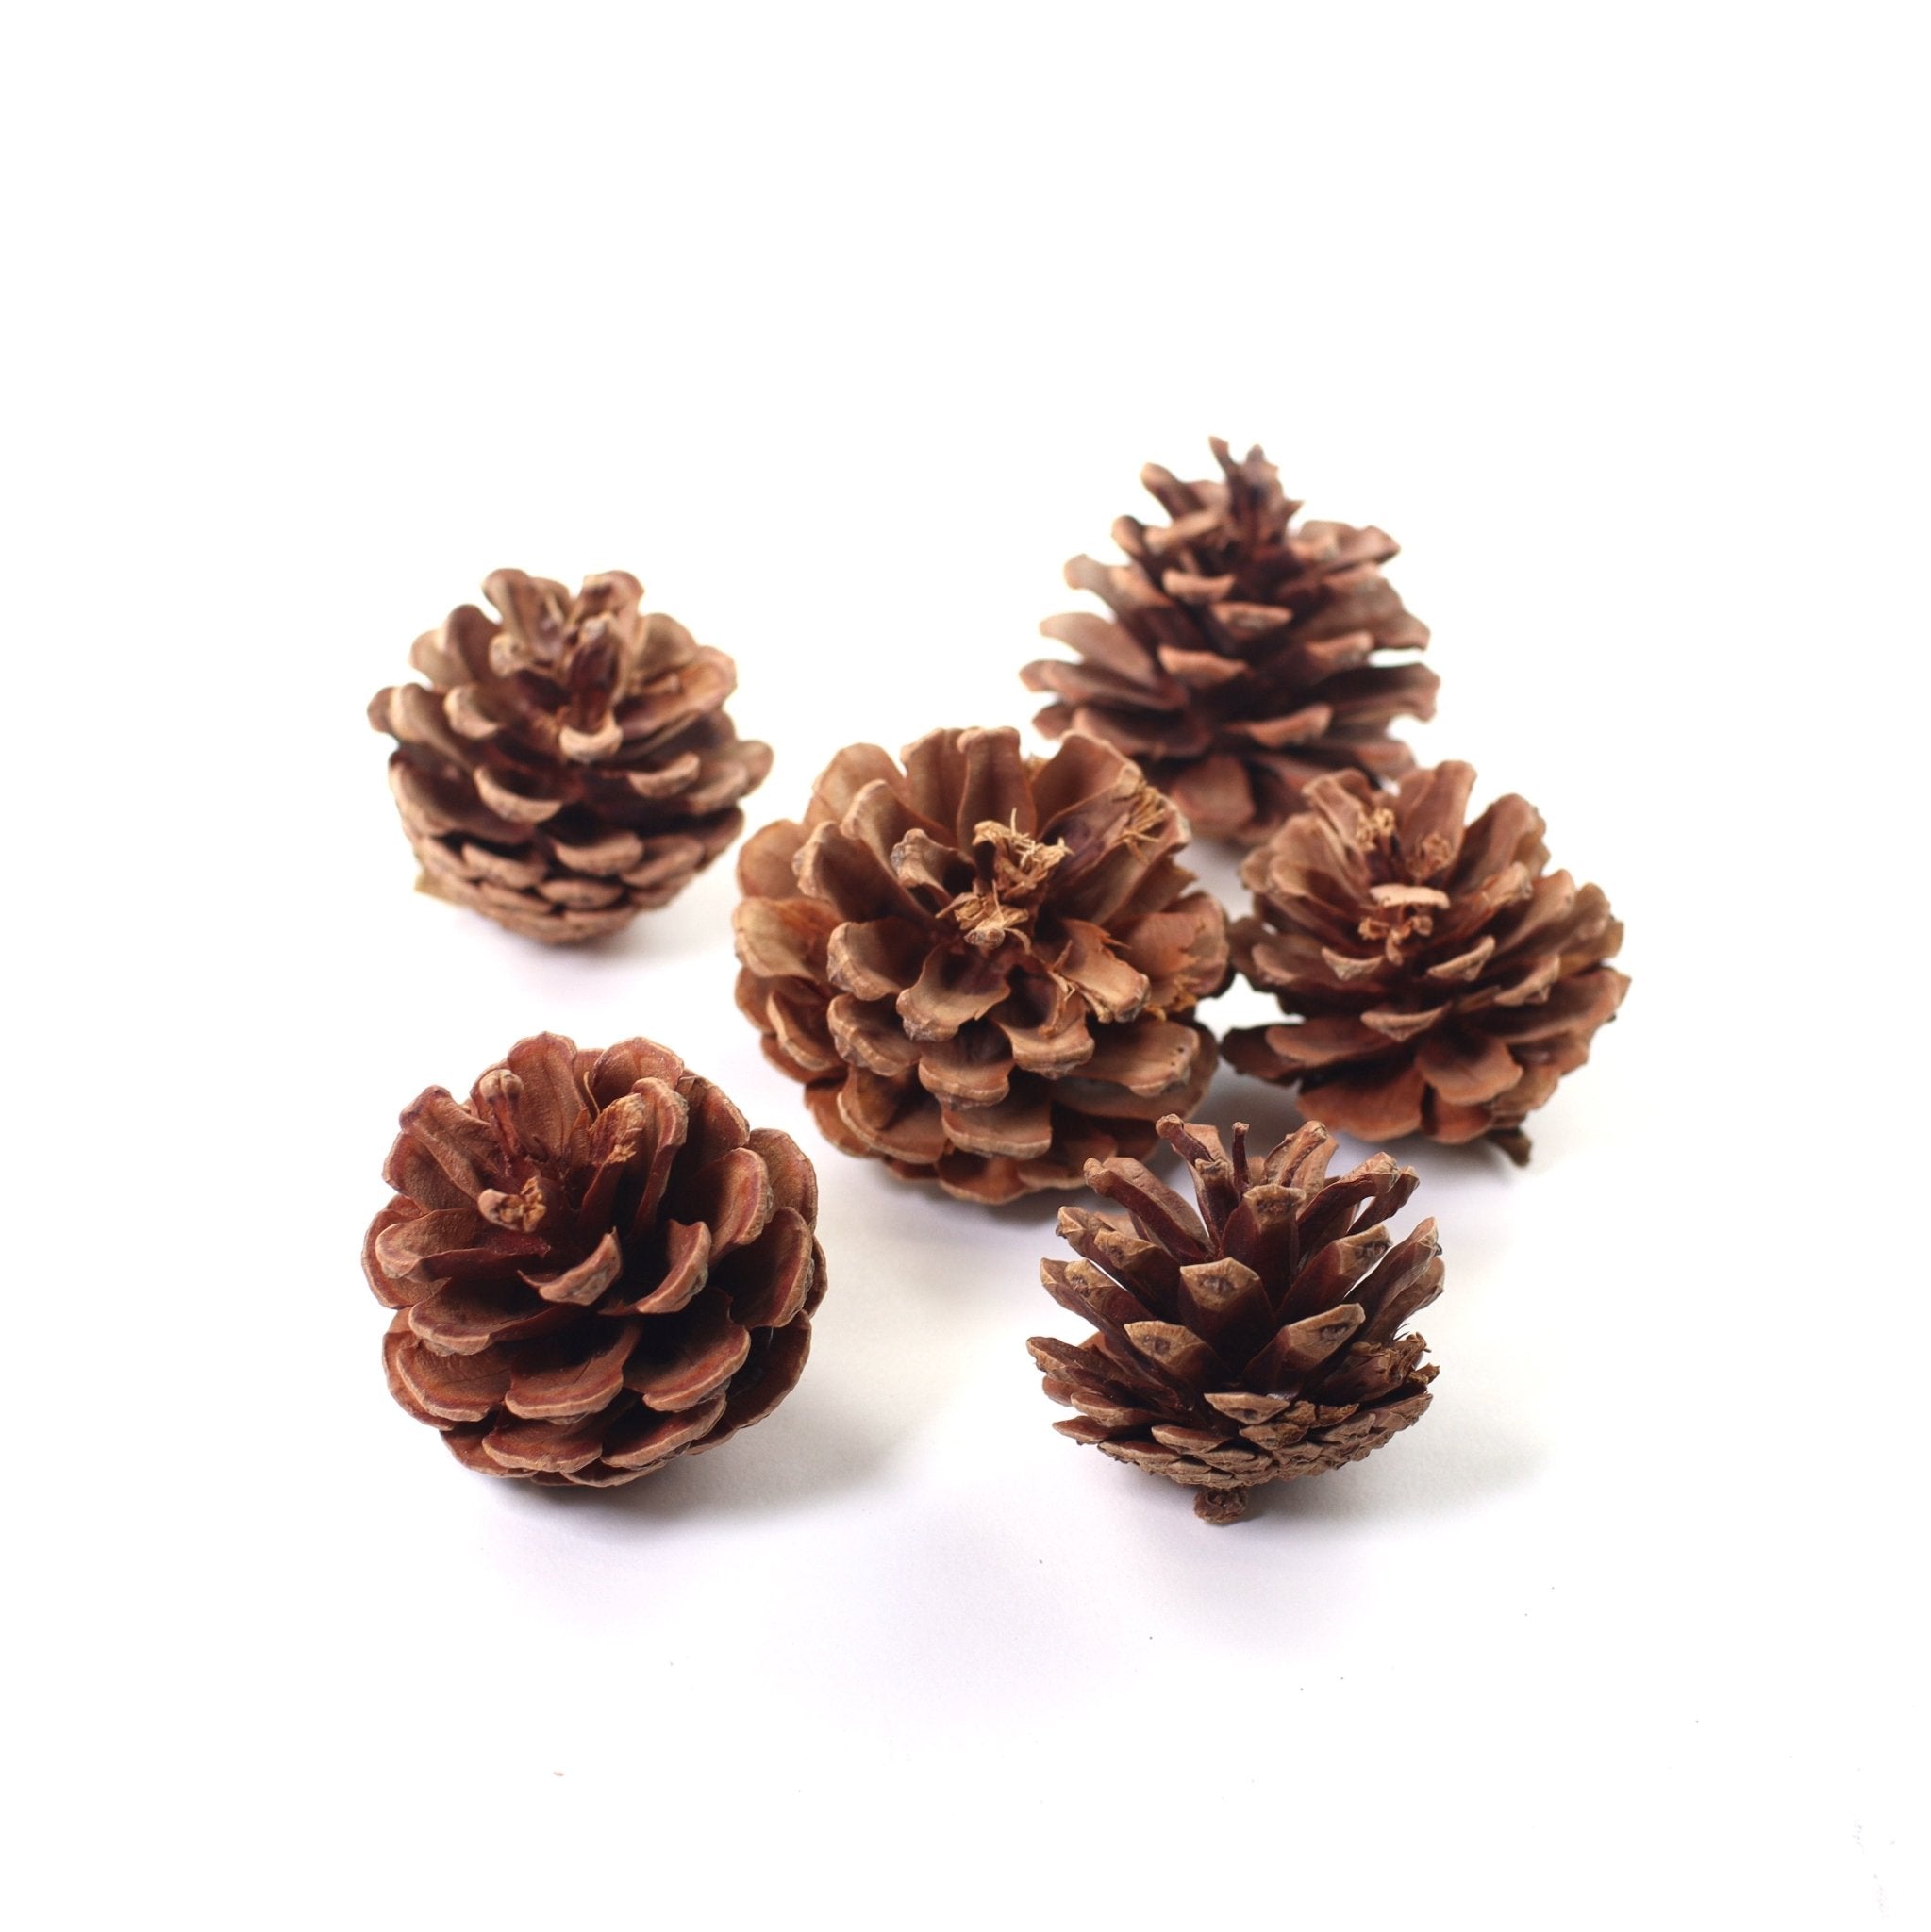 12Pcs Natural Pine Cone Picks Christmas Pinecone With Wired Stems